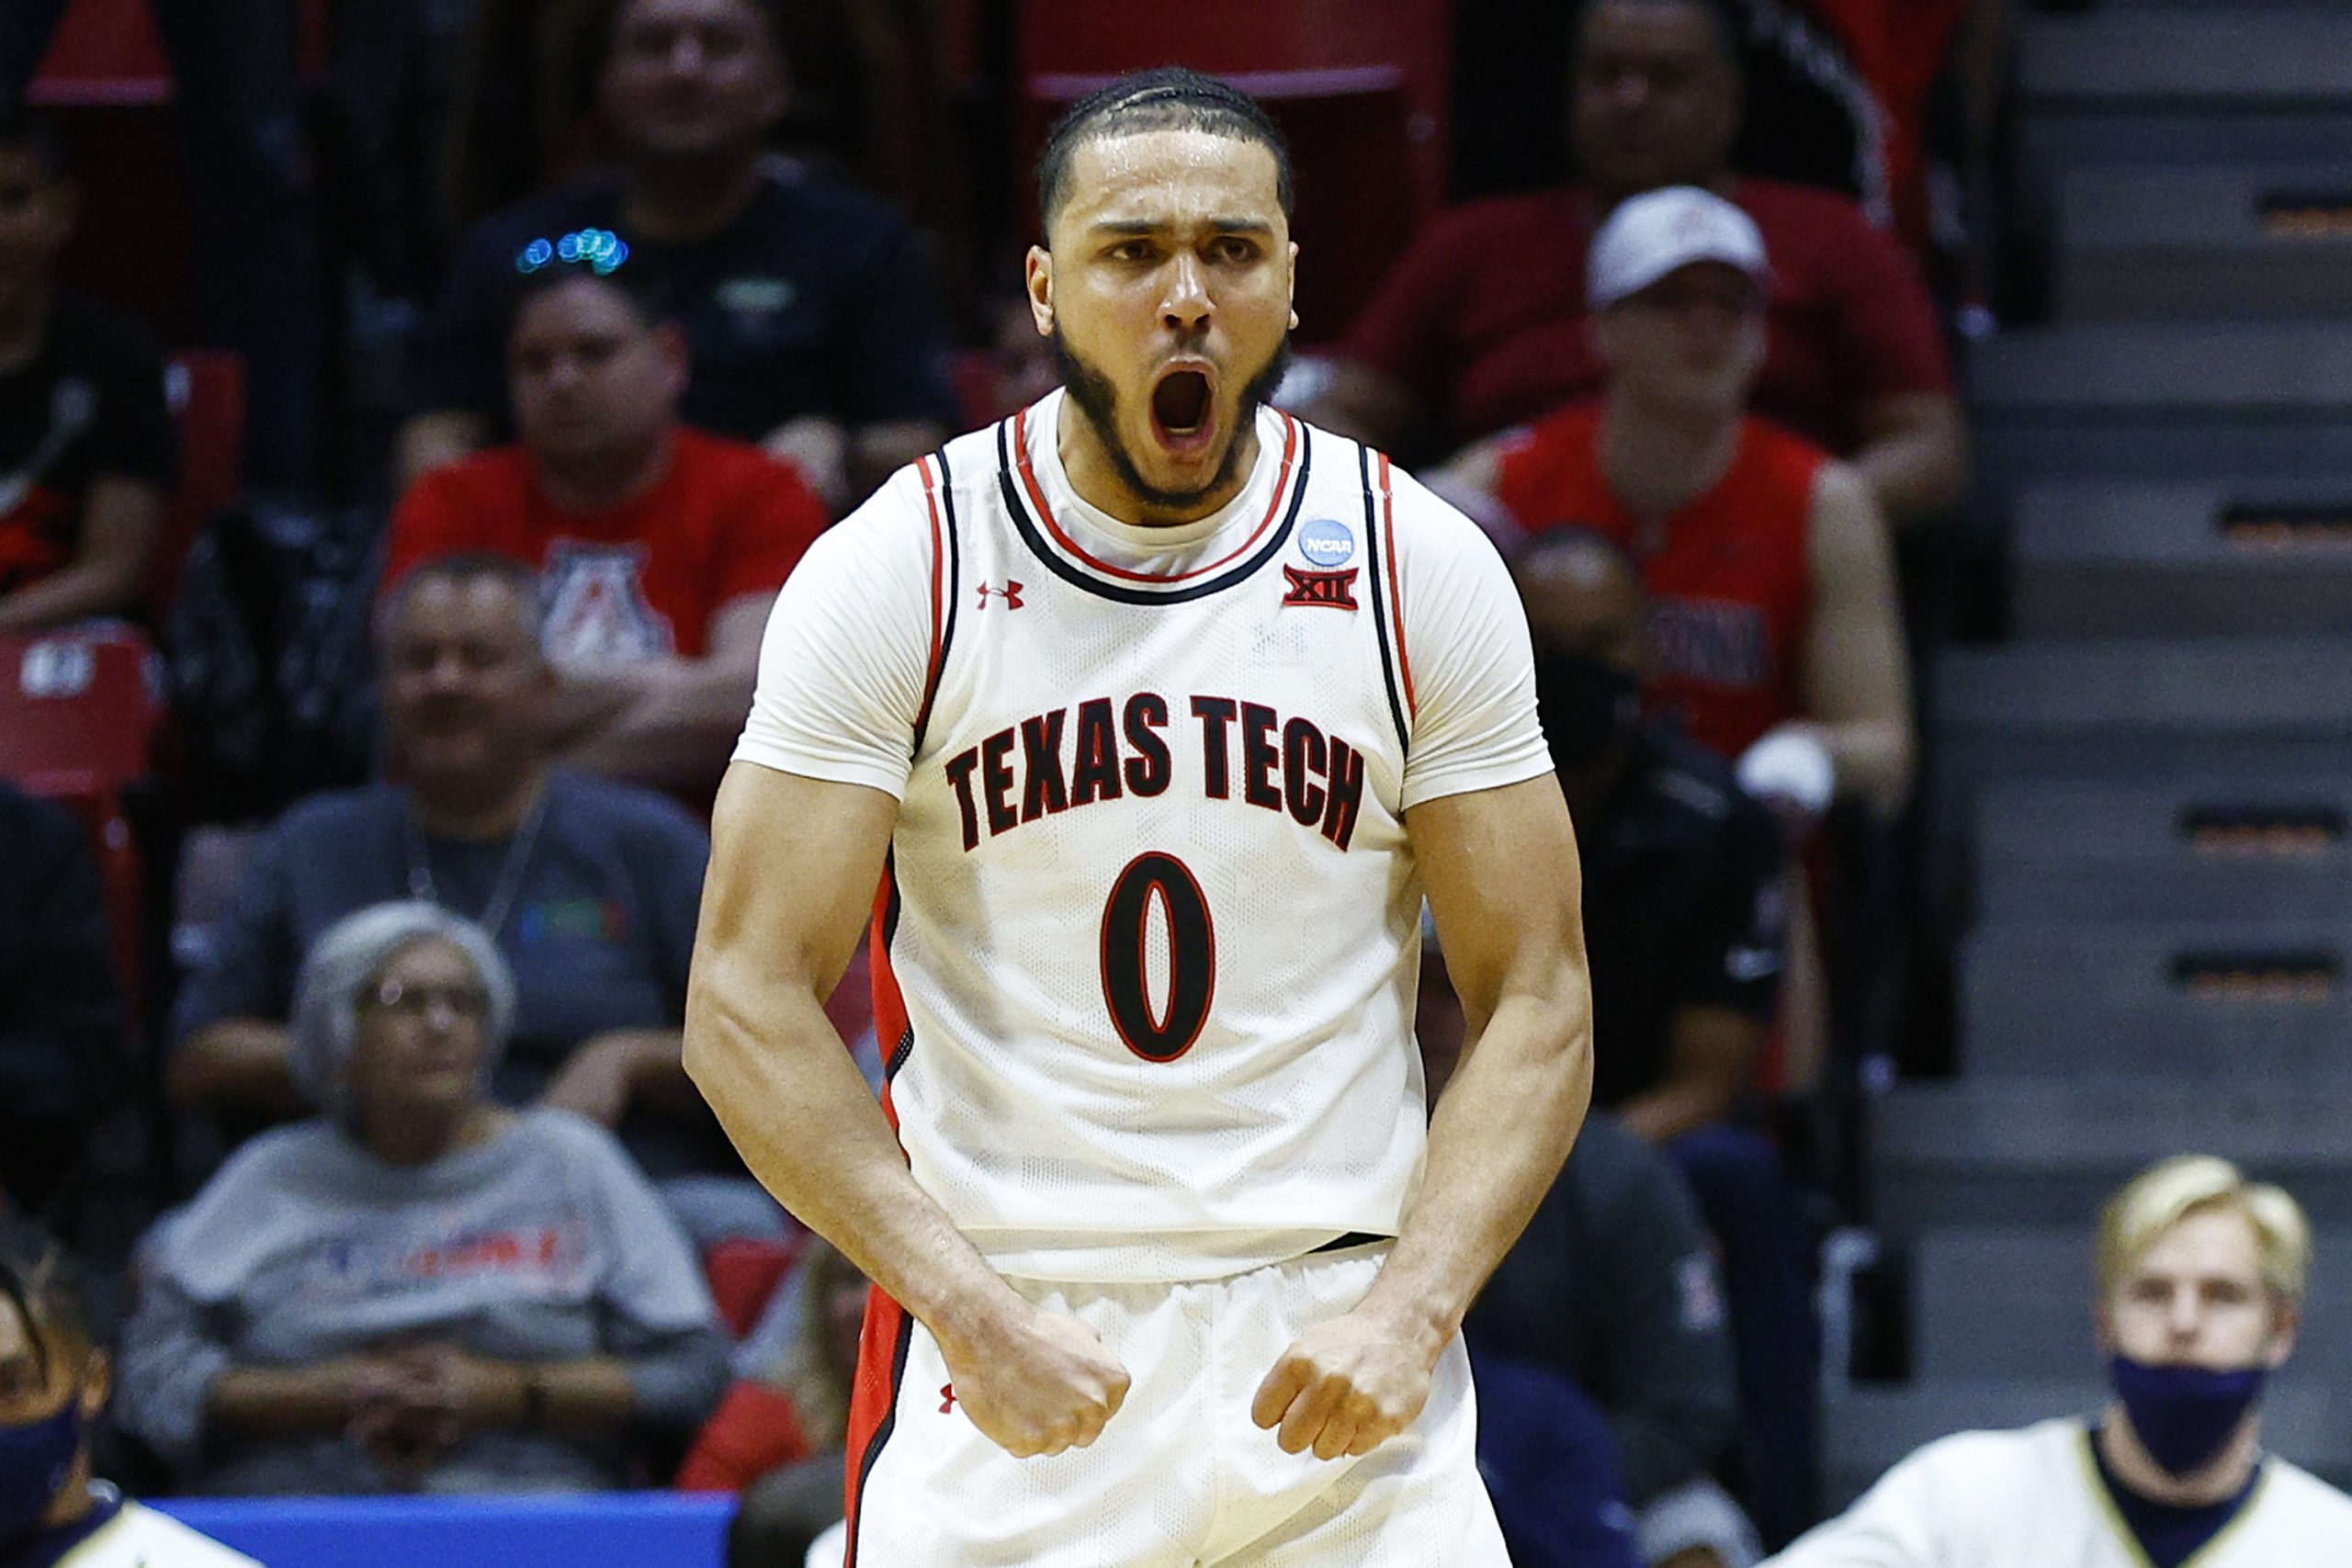 March Madness Update: Texas Tech Reaches Sweet 16; Baylor, Texas, and TCU Eliminated